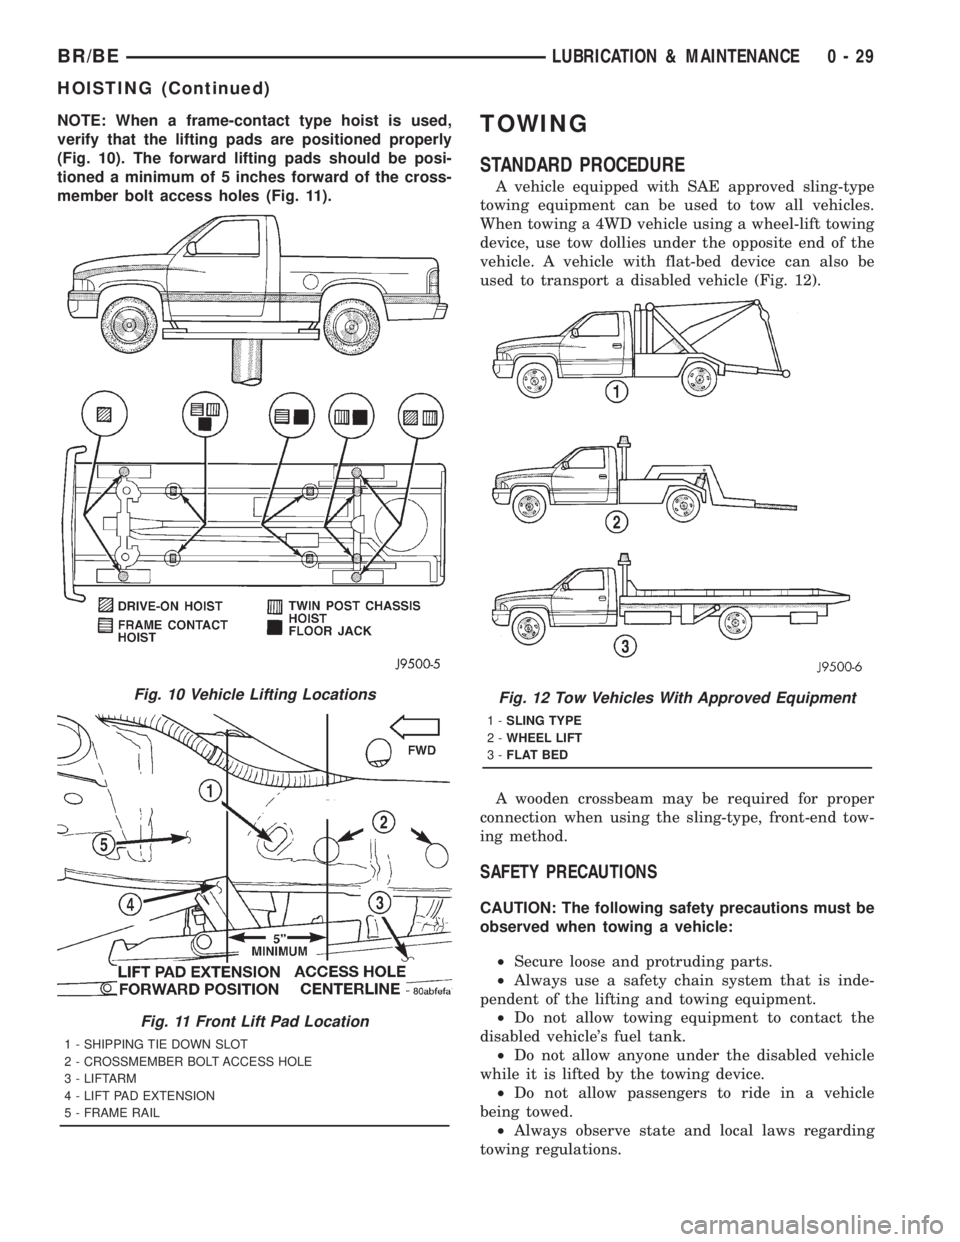 DODGE RAM 2001  Service Repair Manual NOTE: When a frame-contact type hoist is used,
verify that the lifting pads are positioned properly
(Fig. 10). The forward lifting pads should be posi-
tioned a minimum of 5 inches forward of the cros